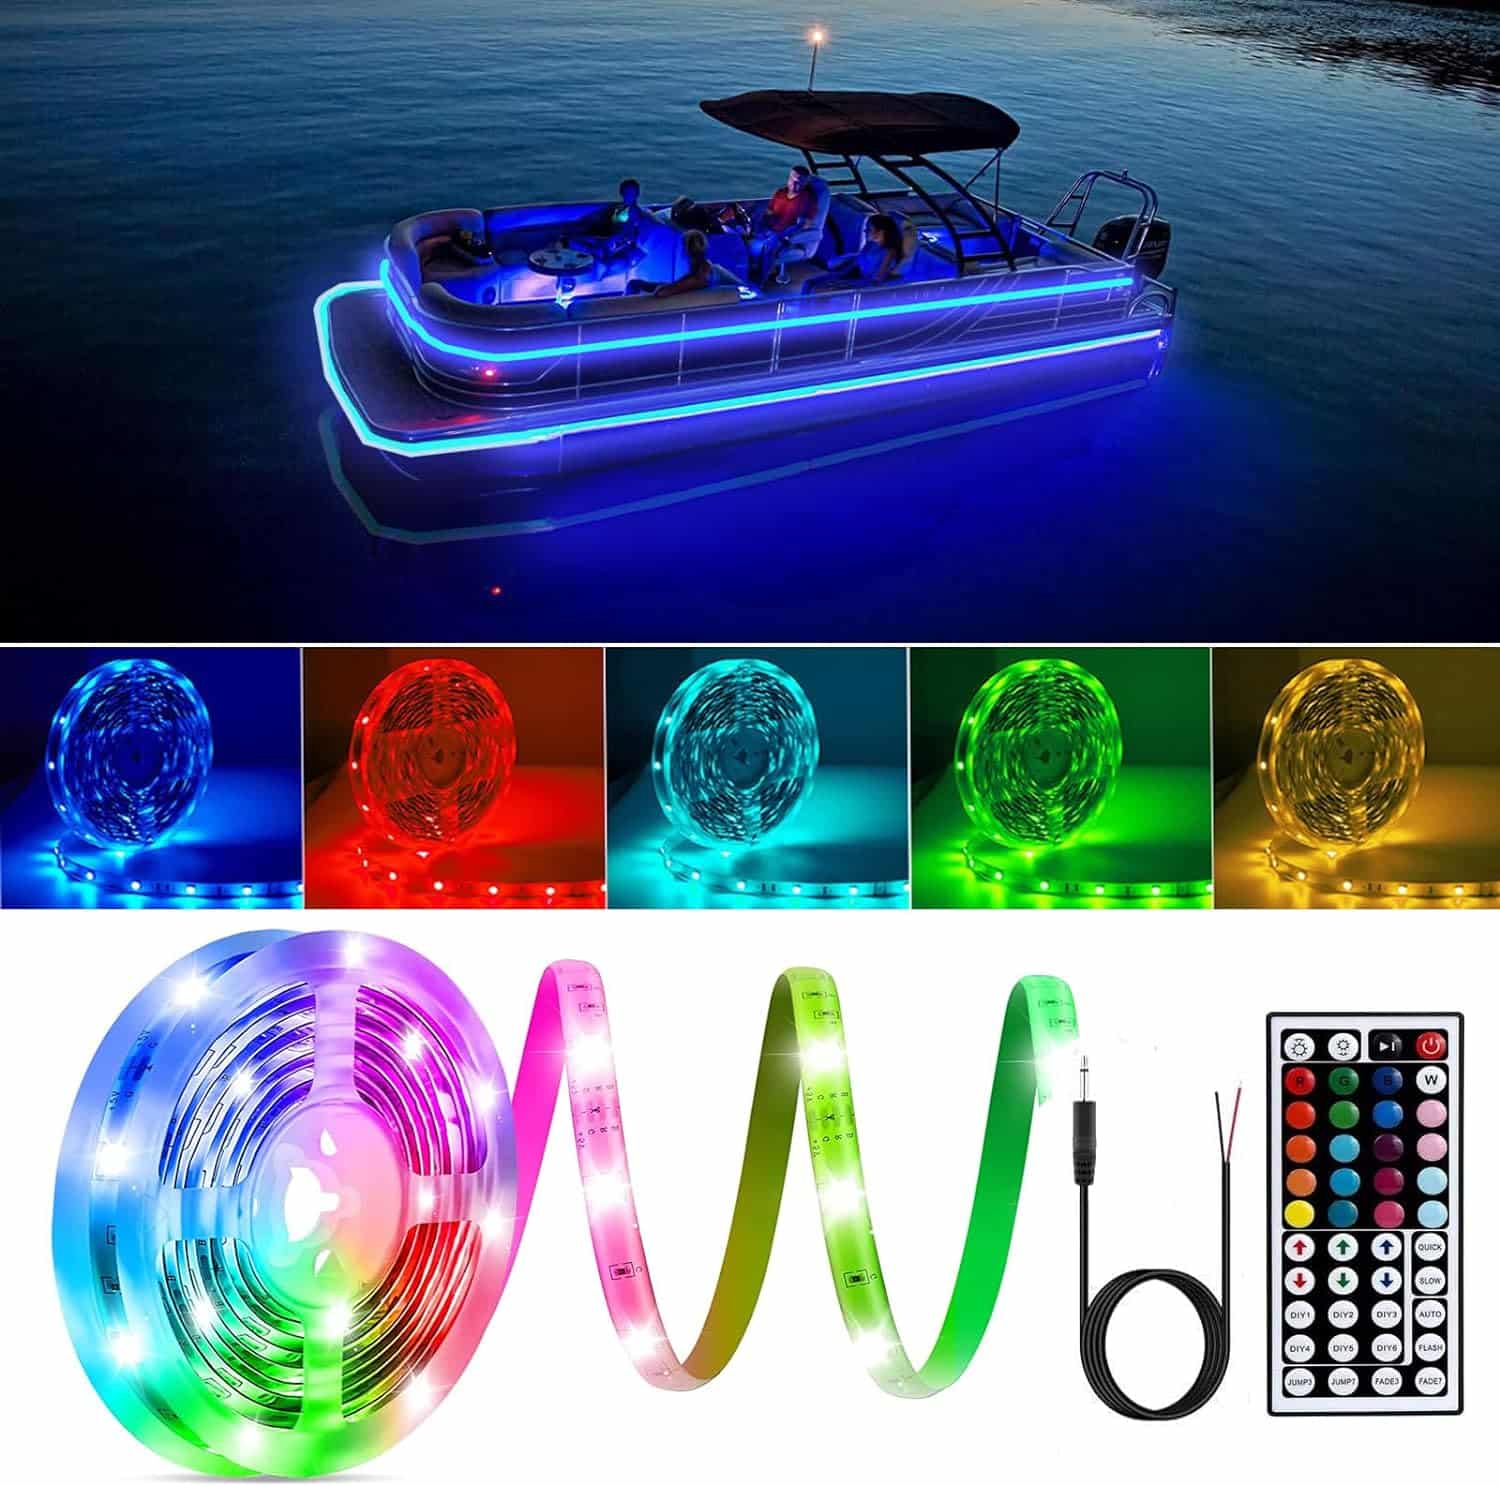 32.8Ft Boat Lights, Waterproof Led Strip Lights, 20 Colors Changing Boat Accessories with Remote, 12V Flexible RGB Lights for Boat Sailboat Kayak Fishing RV Awning Lights